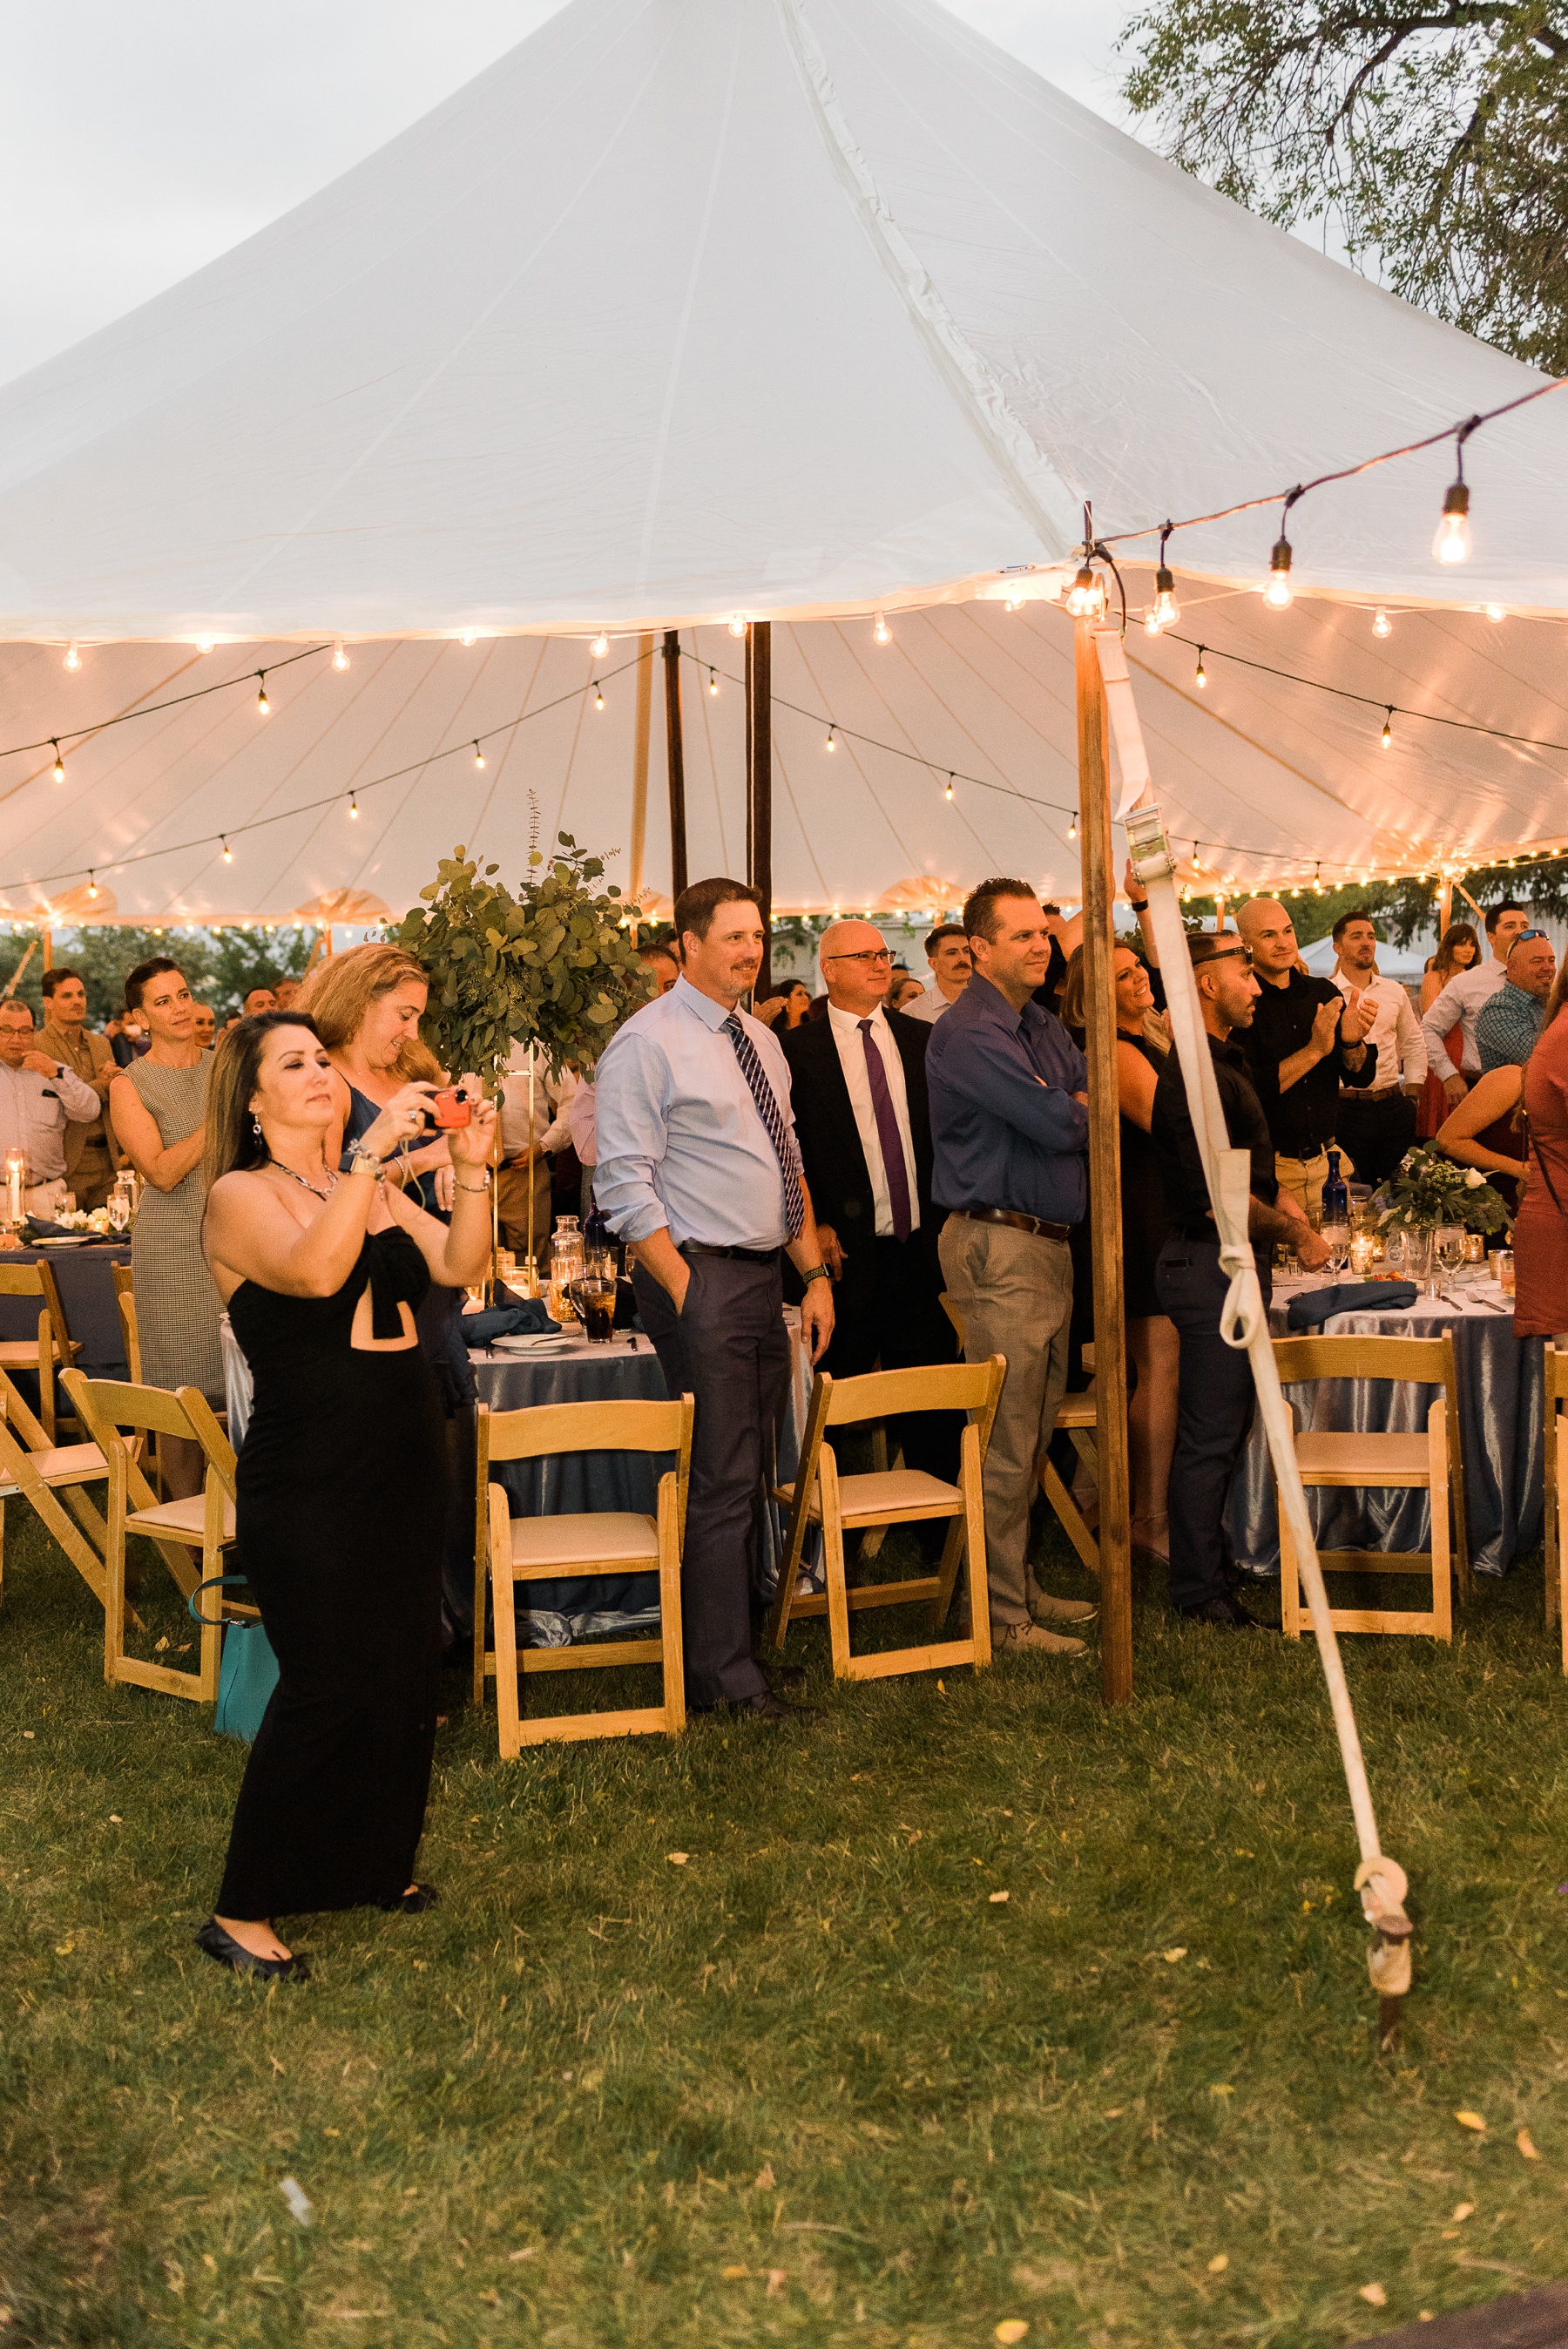 Tented Wedding Reception with Edison Lights